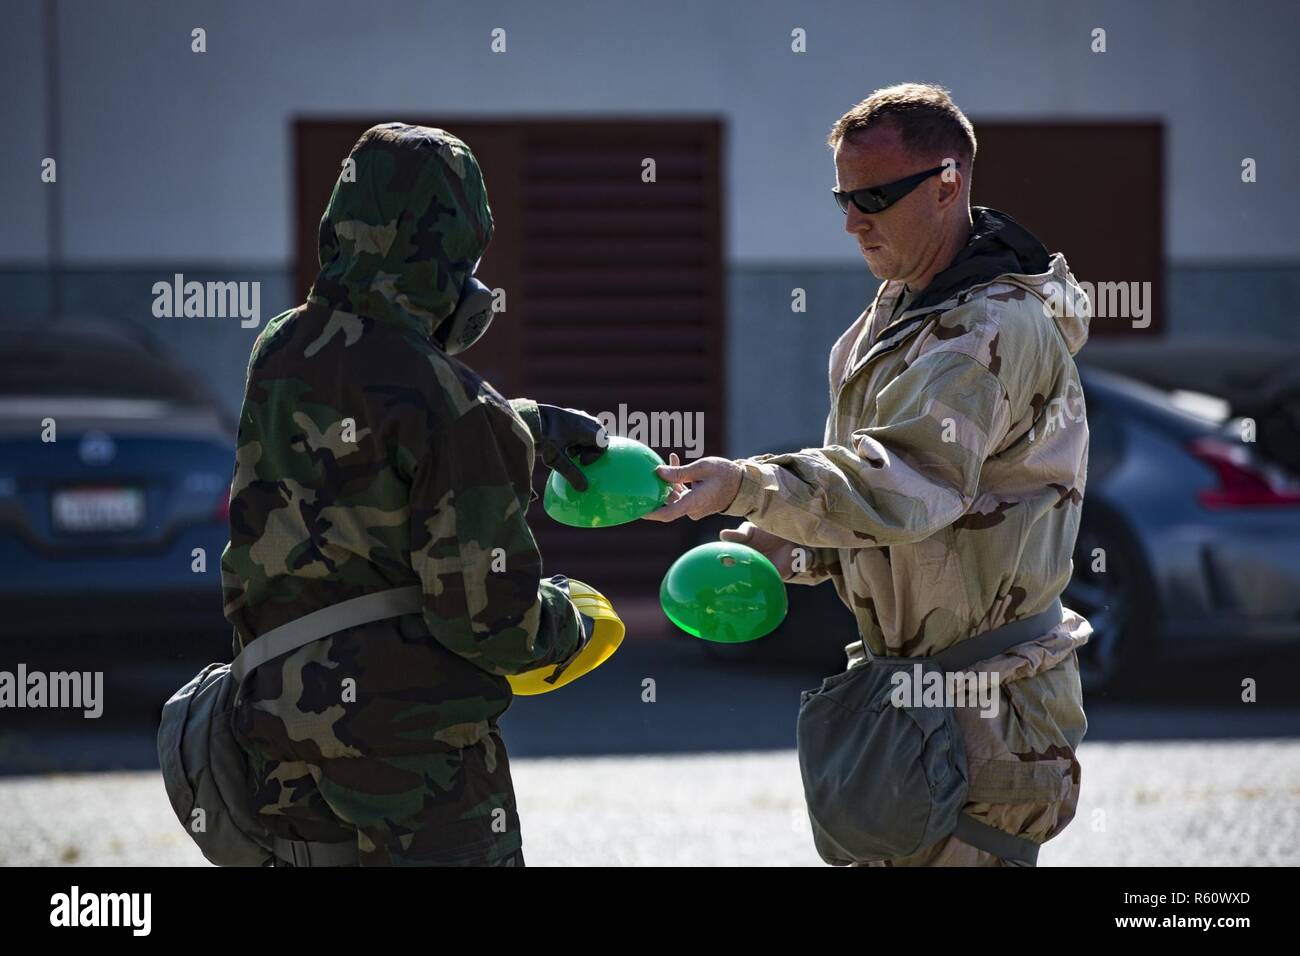 U.S. Marine Staff Sgt. Philip Barnes hands out cones to conduct Reconnaissance, Surveillance and Decontamination Training aboard Marine Corps Base Camp Pendleton, Calif., April 26, 2017. The cones serve as simulated threats and hazards in a chemical, biological, radiological and nuclear environment. The purpose of this training is to accomplish missions within CBRN environment.  Barnes is the current CBRN Chief for 1st Maintenance Battalion, 1st Marine Logistics Group. Stock Photo